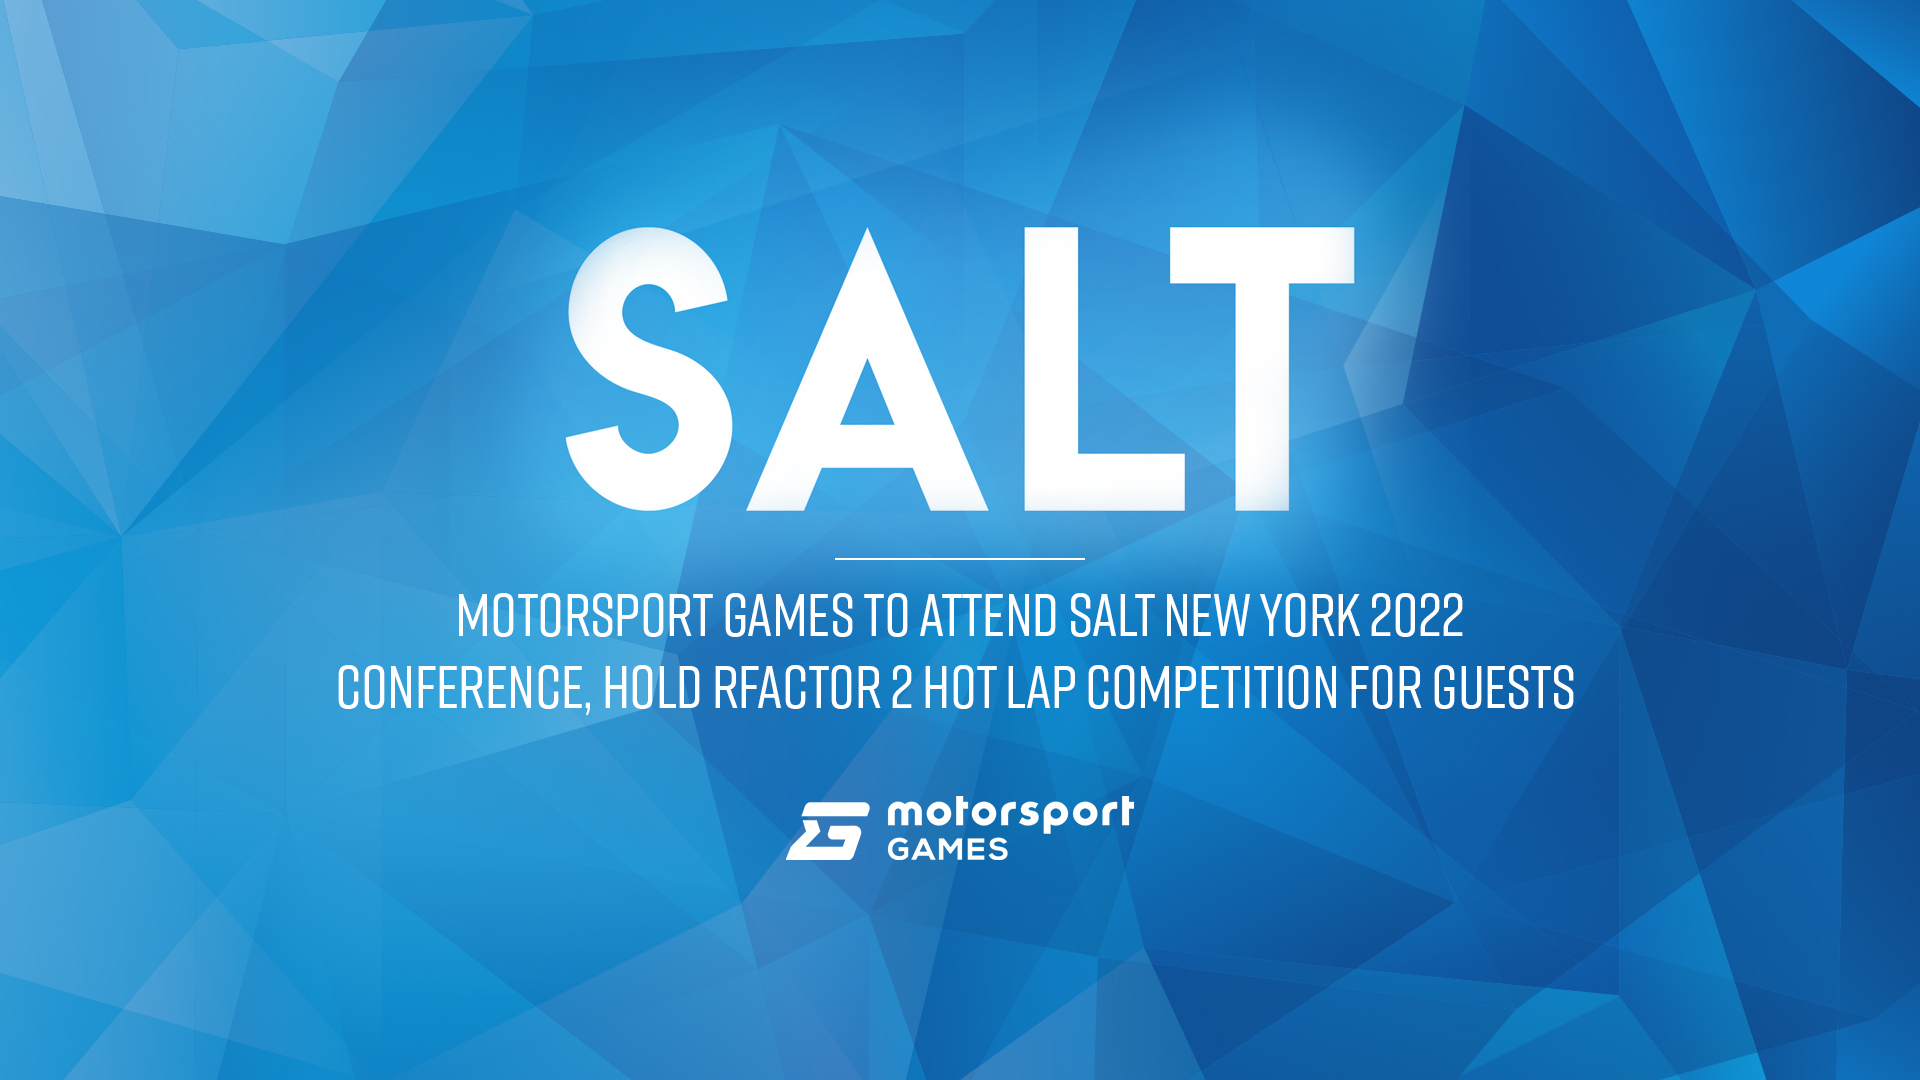 MOTORSPORT GAMES TO ATTEND SALT NEW YORK 2022 CONFERENCE, HOLD  RFACTOR 2 HOT LAP COMPETITION FOR GUESTS